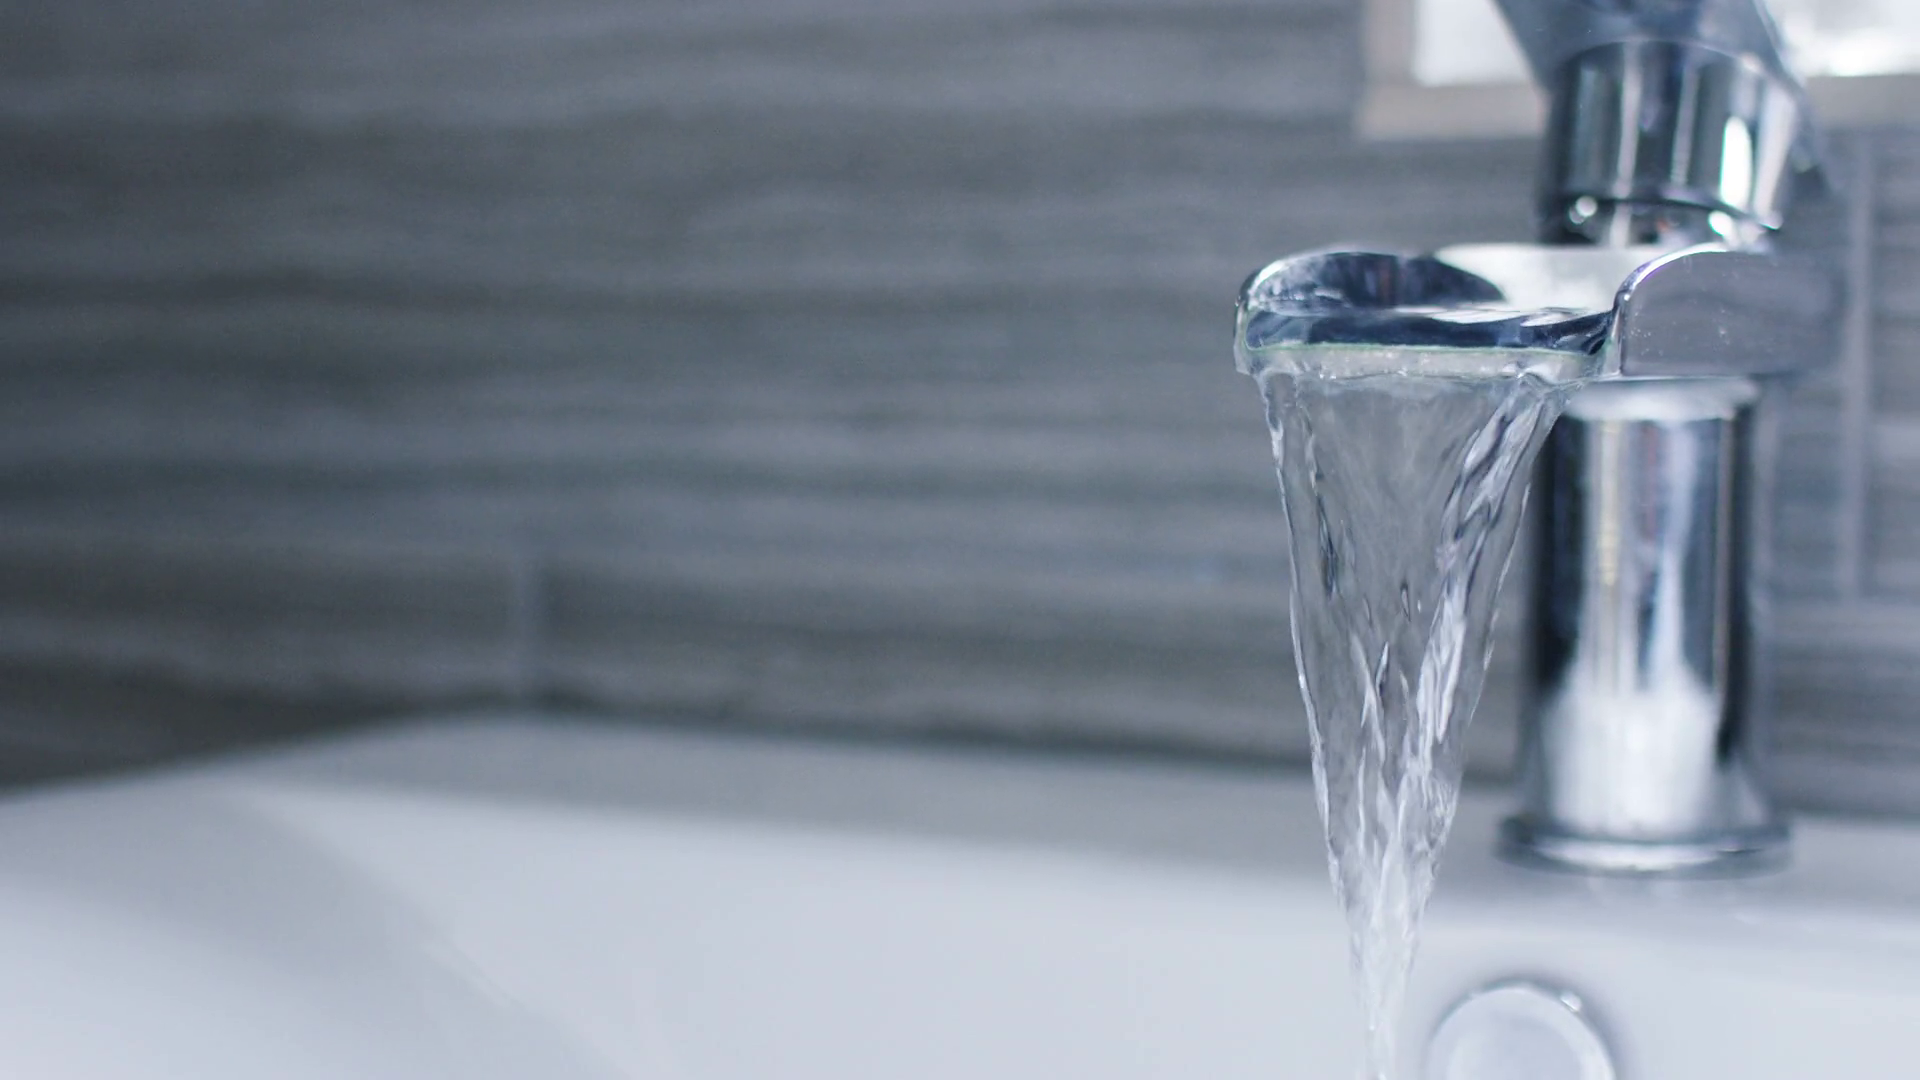 Running water from a waterfall tap in a bathroom, in slow motion ...